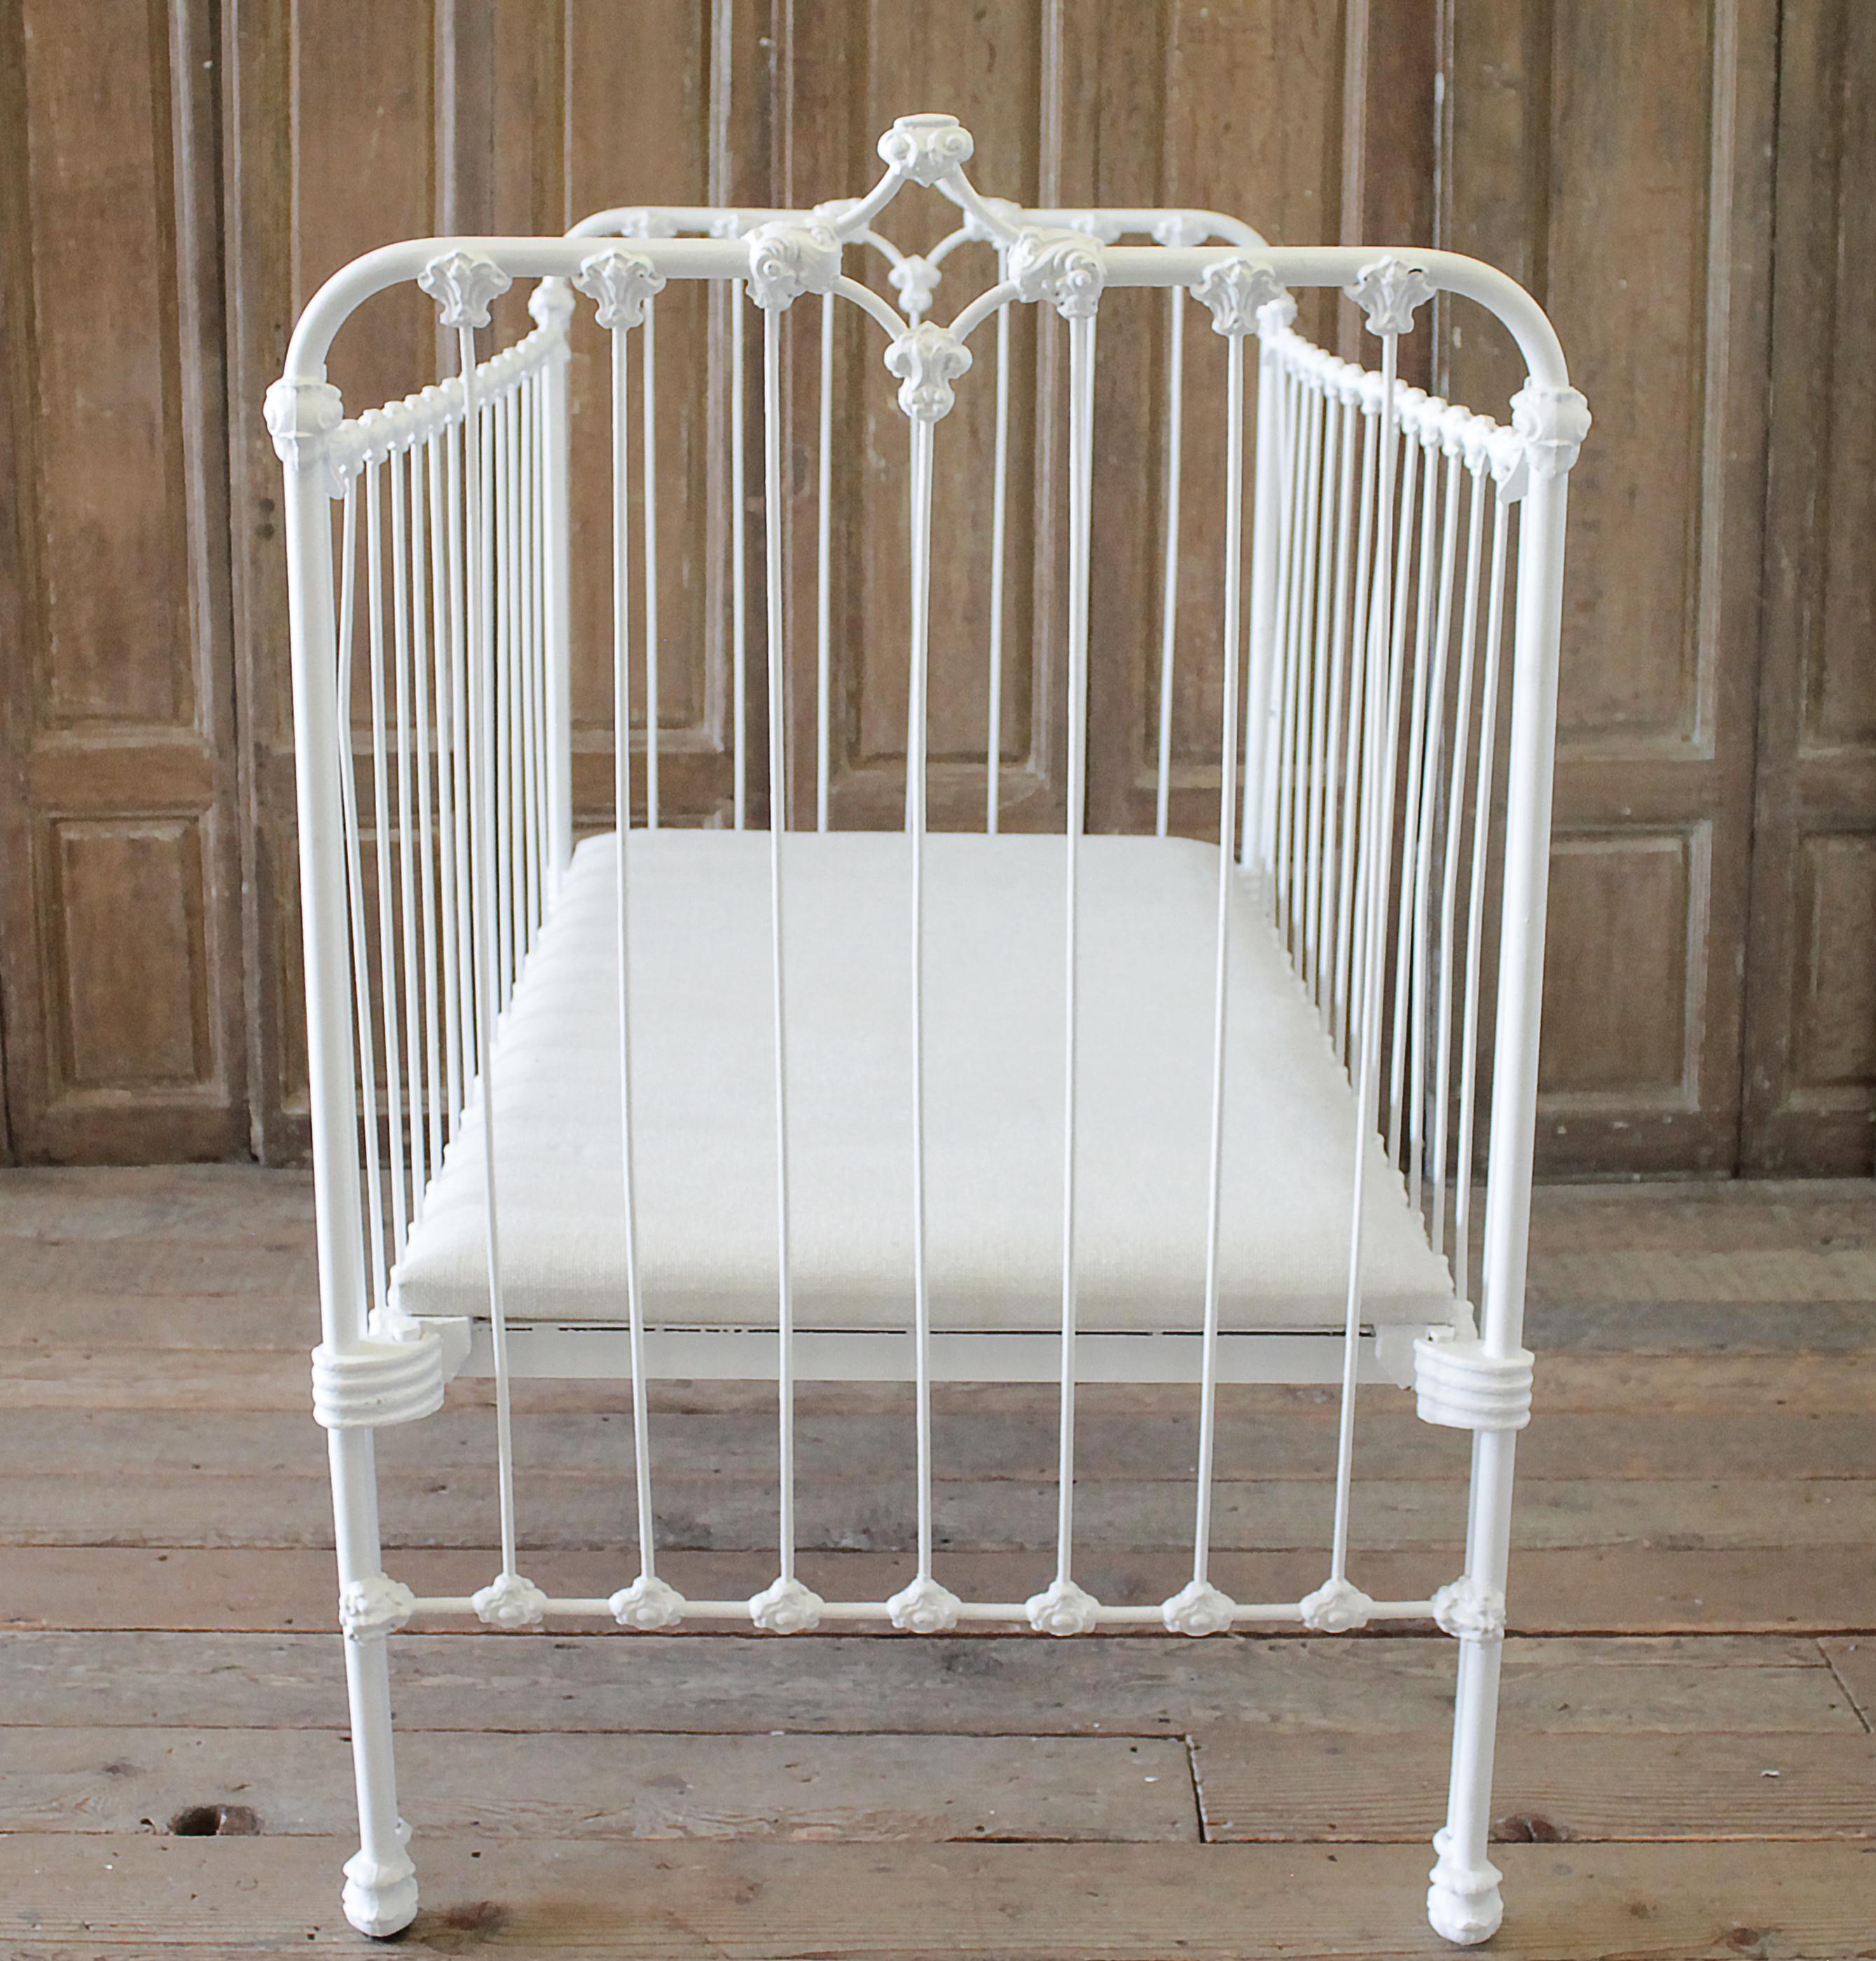 19th Century Painted White Iron Crib Baby Bed In Good Condition For Sale In Brea, CA